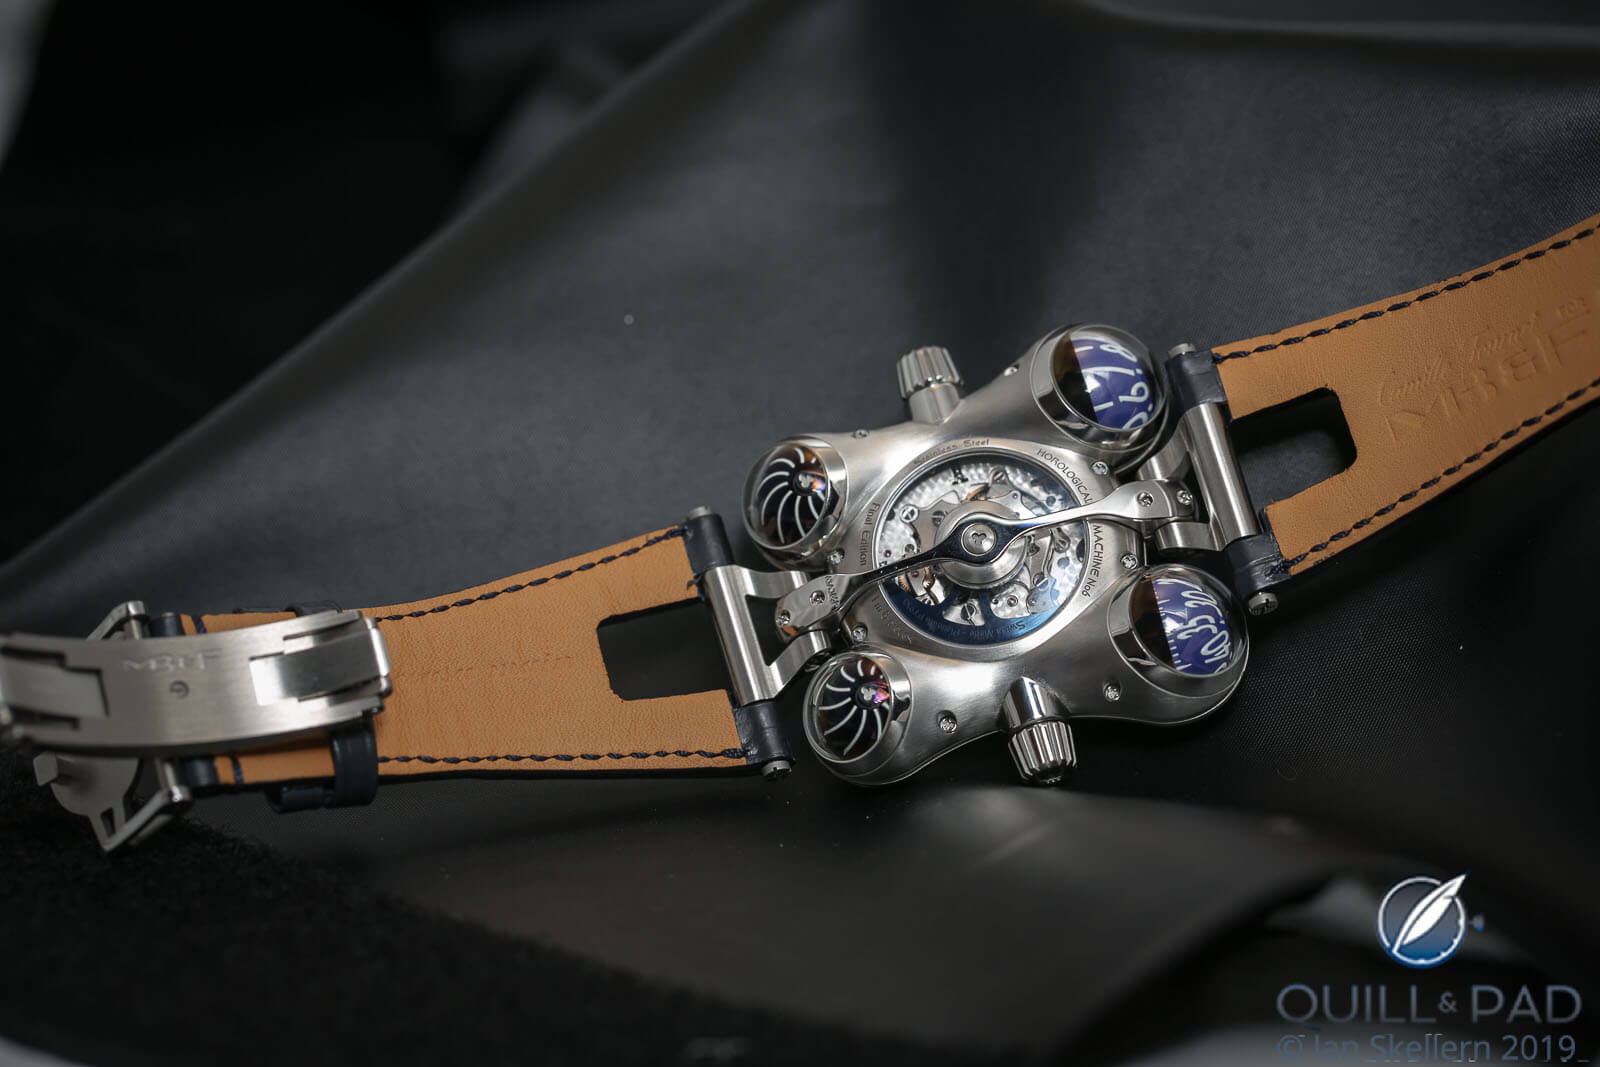 View of the back of the MB&F HM6 Final Edition